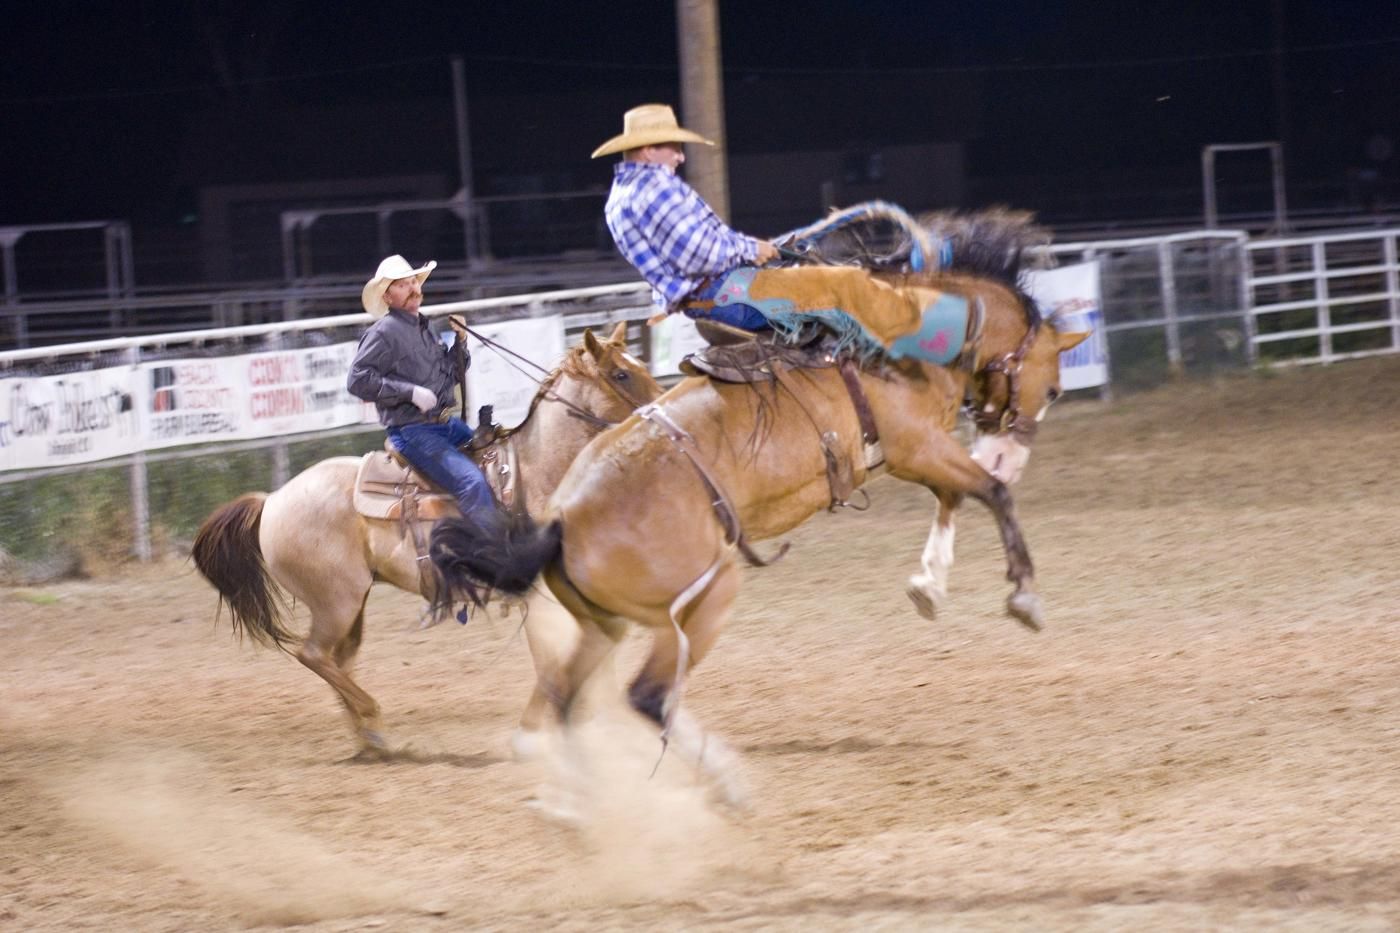 pro rodeo cowboy on horse jumping with back feet with other cowboy